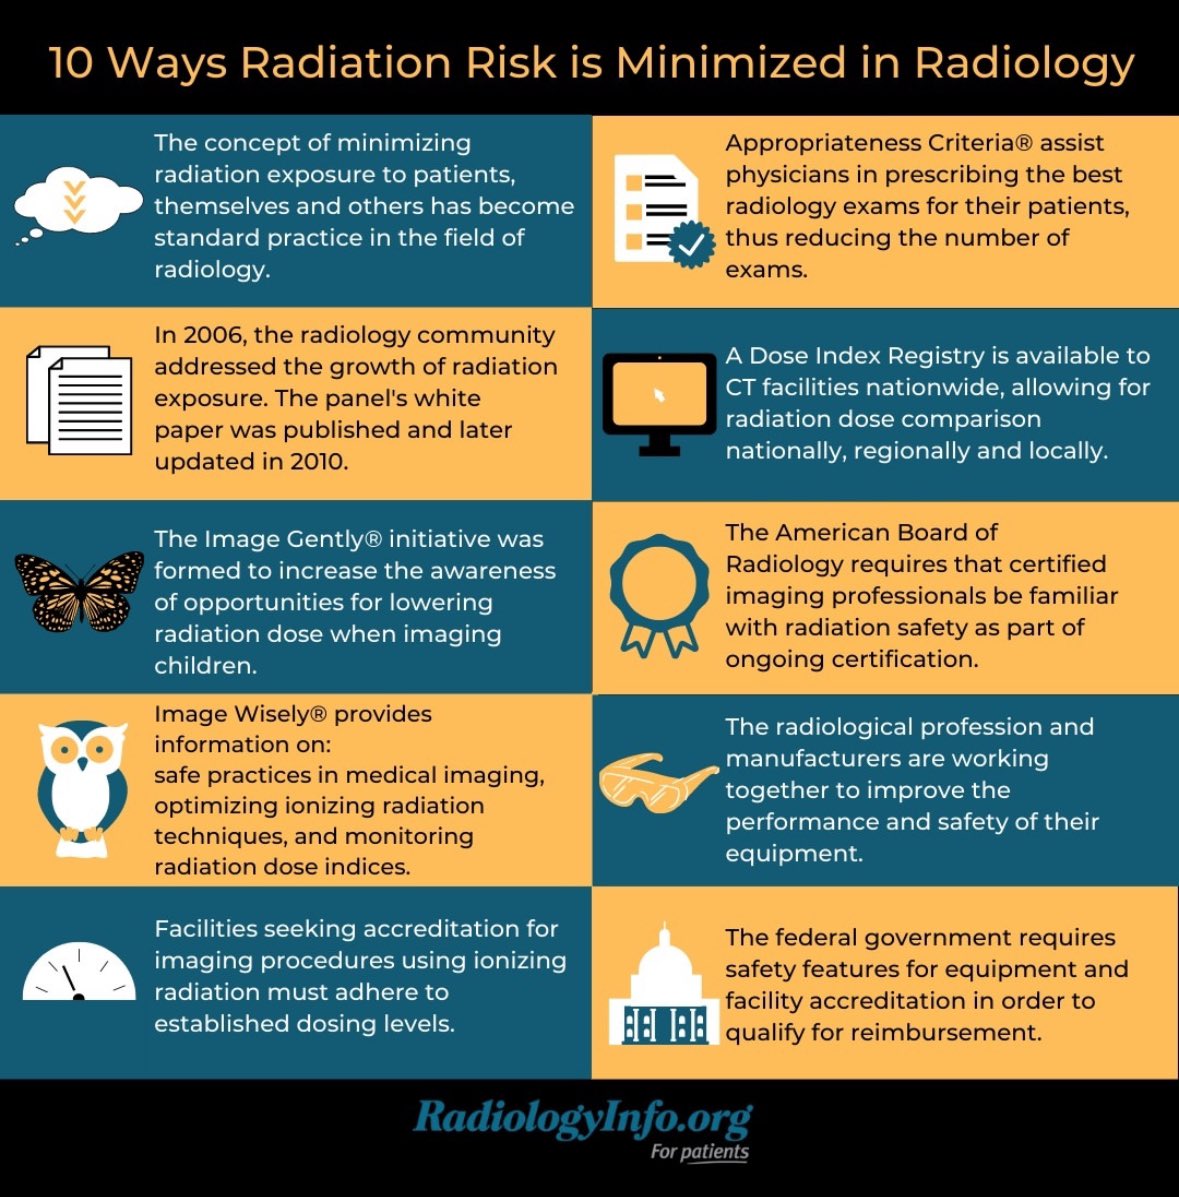 Radiologists and technologists keep patients safe by using the smallest amount of radiation necessary to obtain images. Here are ten ways radiation risk is minimized in radiology. For more information on patient safety, visit bit.ly/3ci9Poj
 @RadiologyInfo_ 
RadThreads